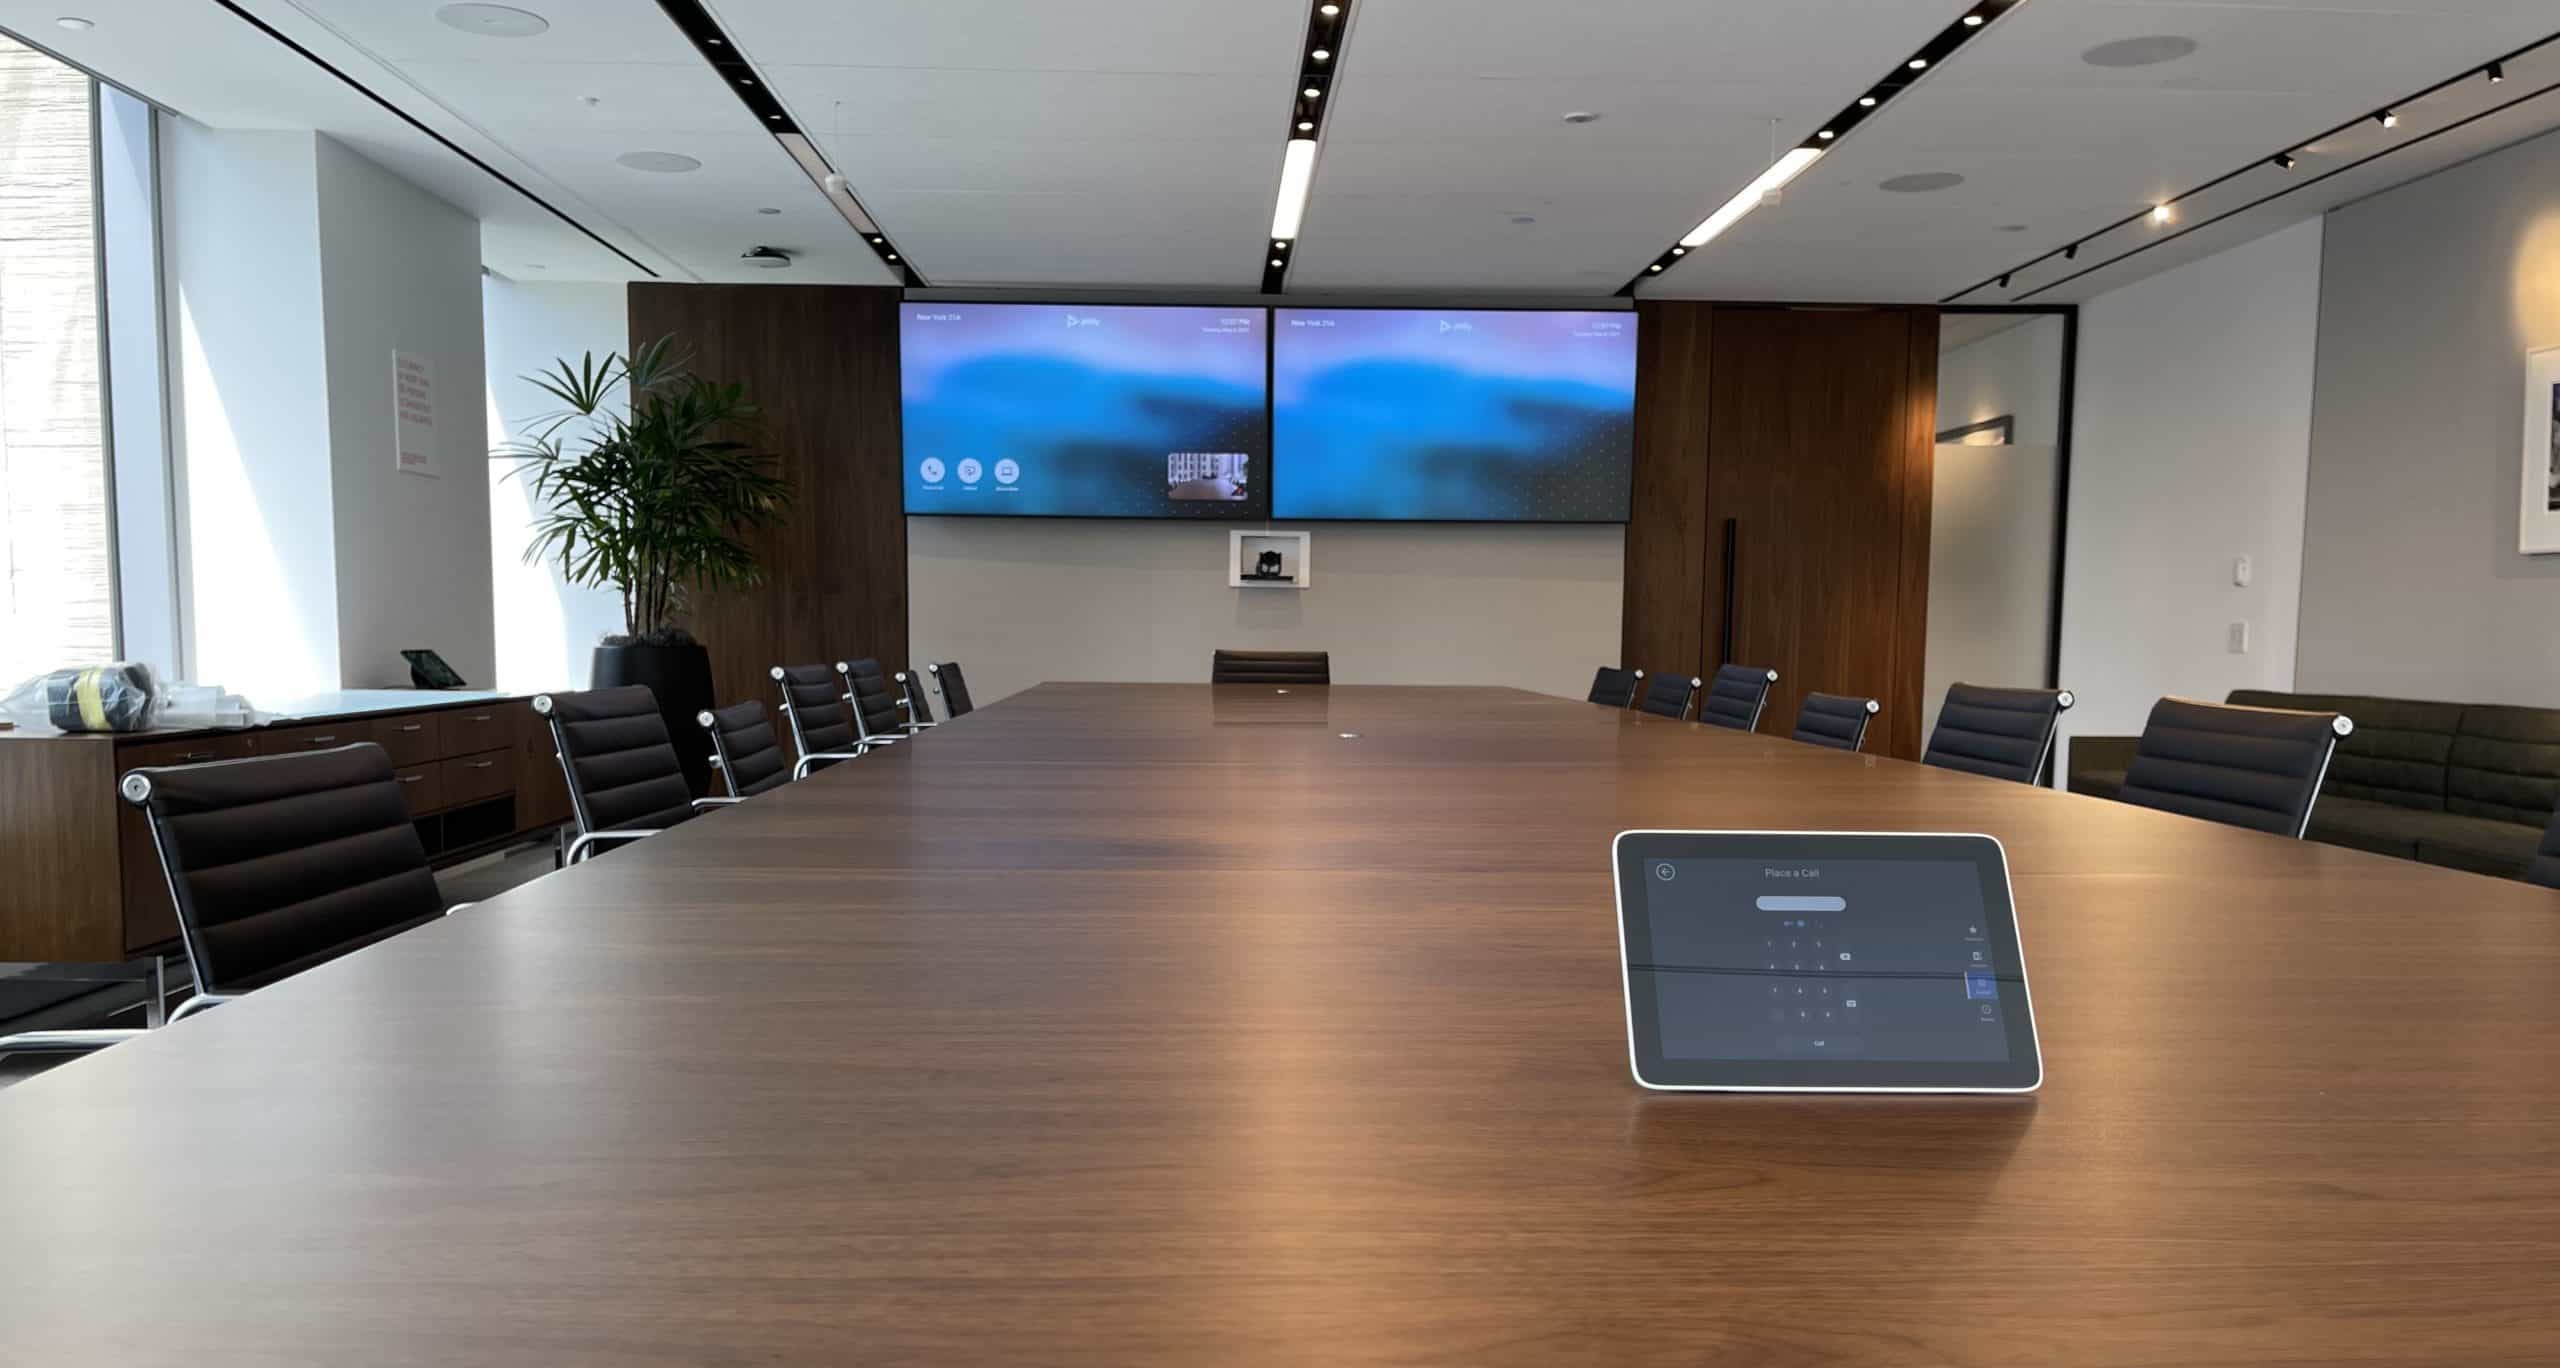 Greenhill & Co. Selects IMT for Video Conferencing Build-Out of New Headquarters in Rockefeller Center